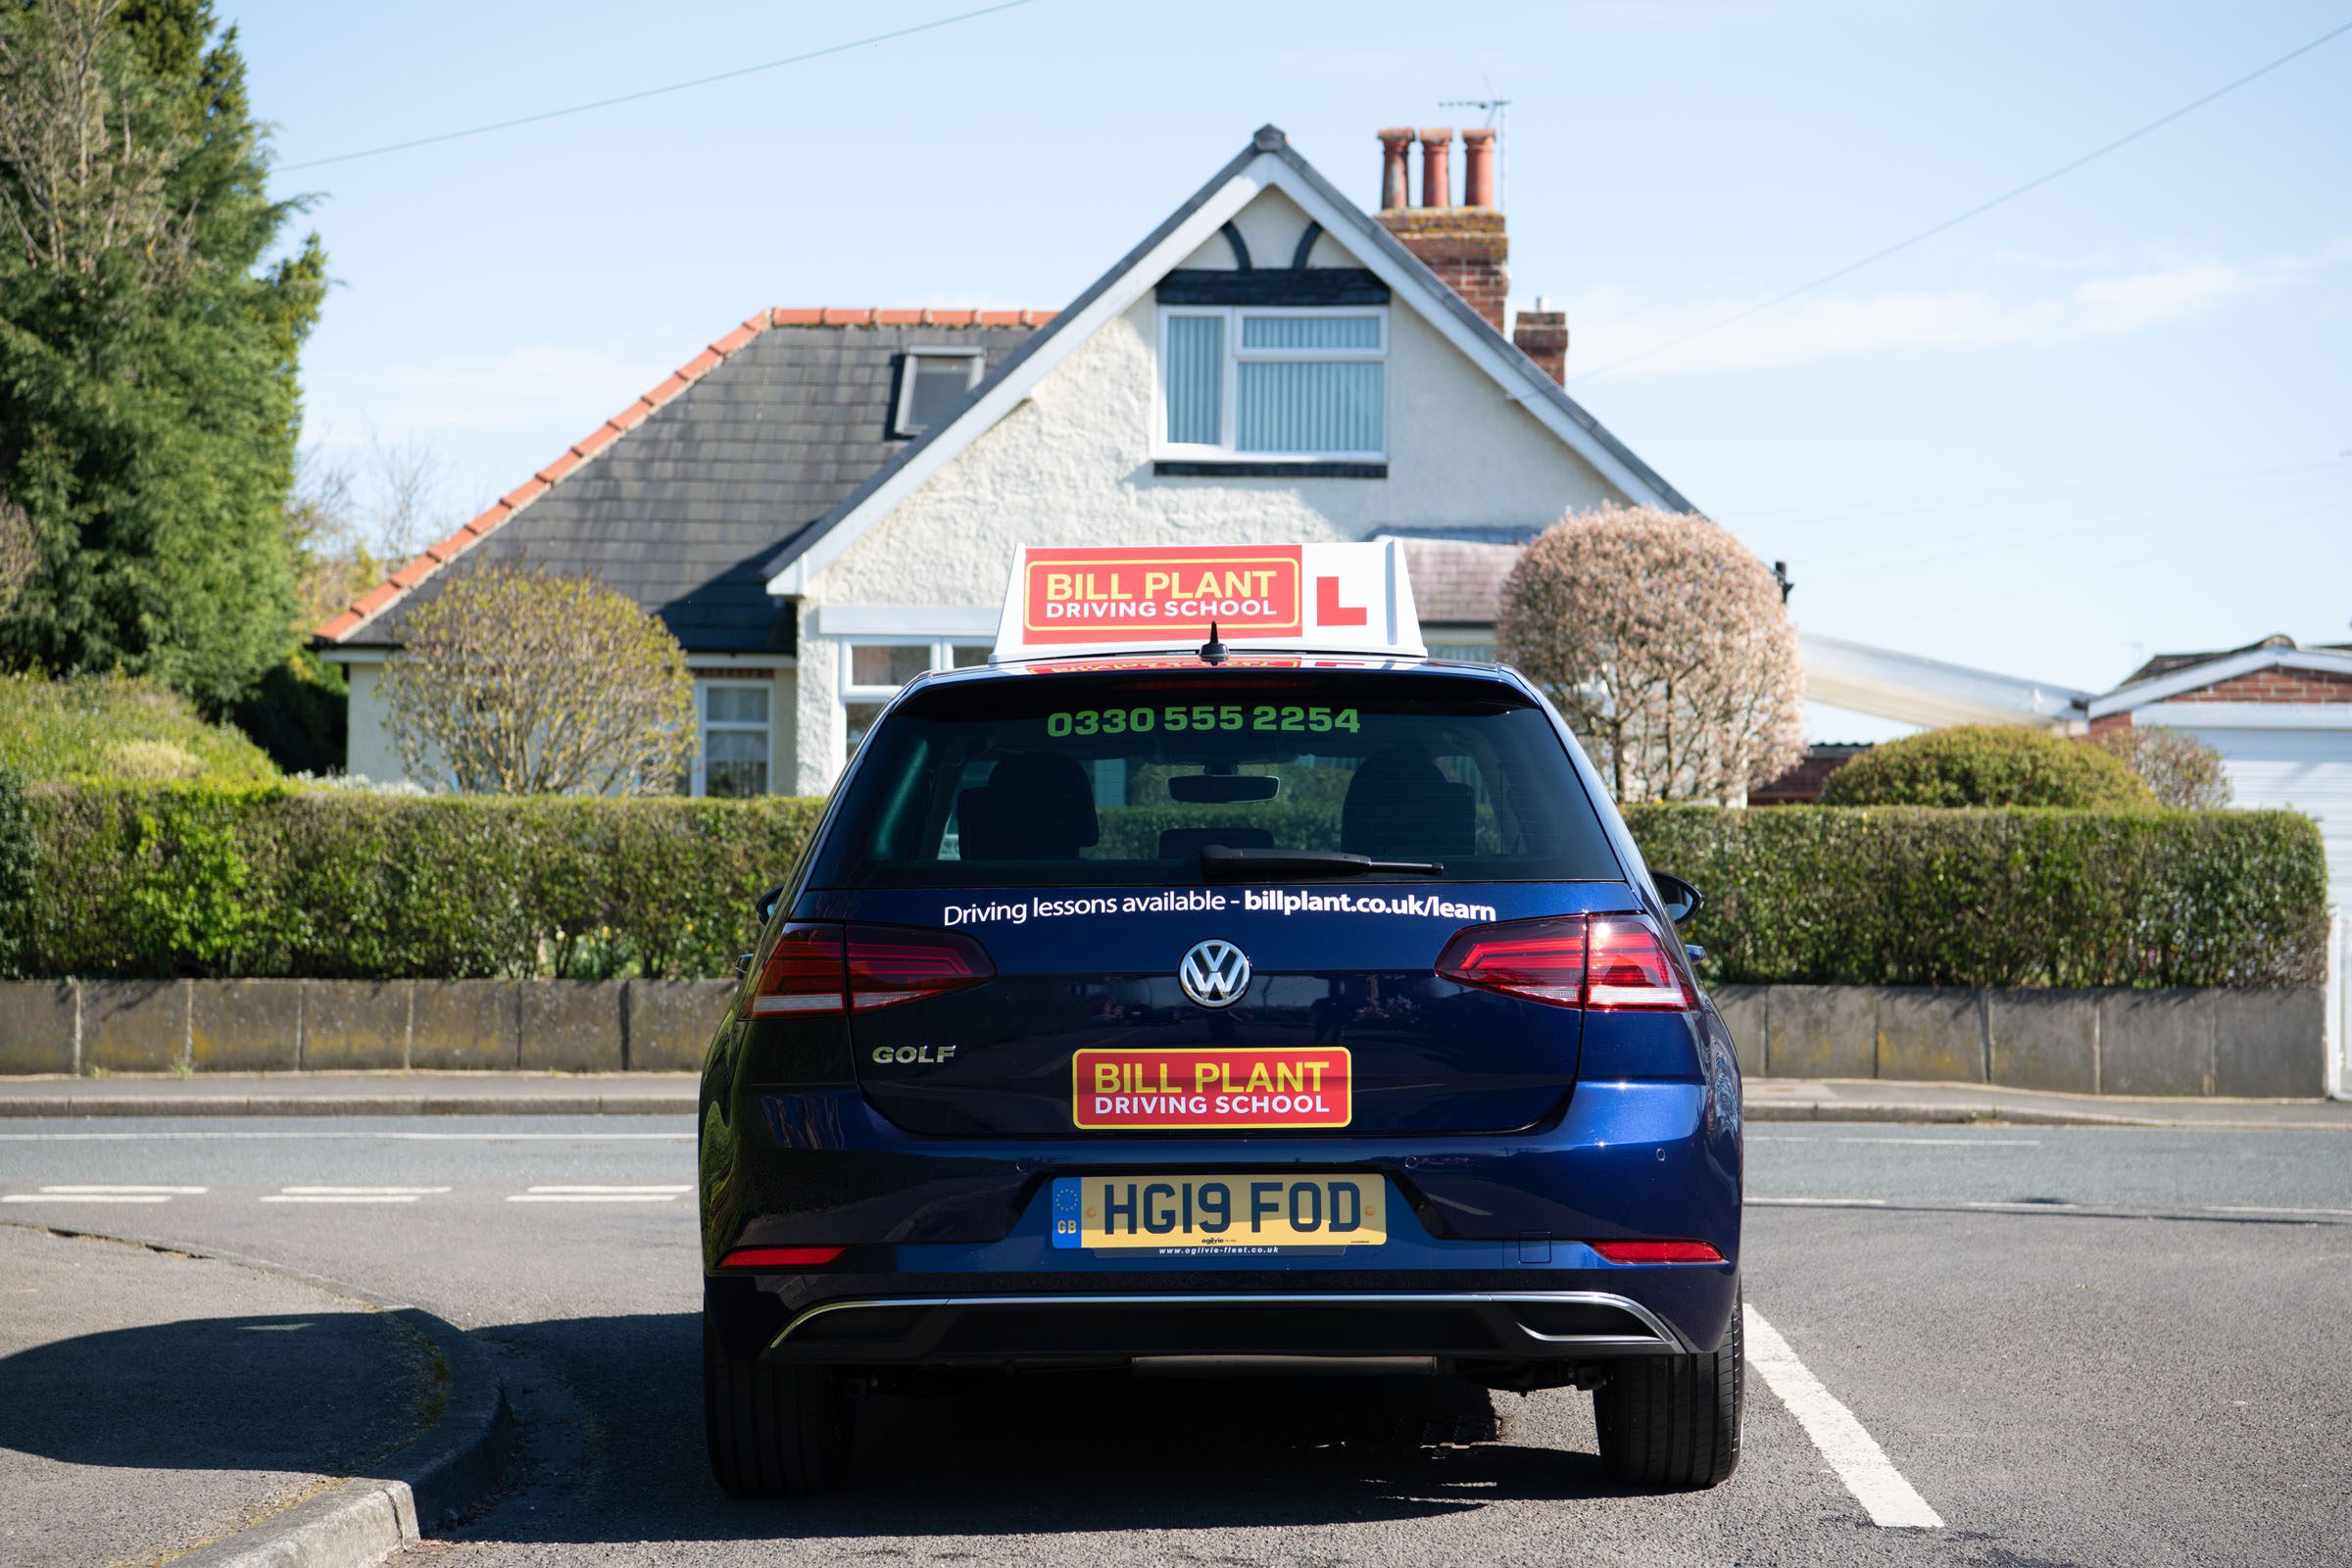 Driving Theory Test Centres In Leeds: Where Can You Take Your Test?